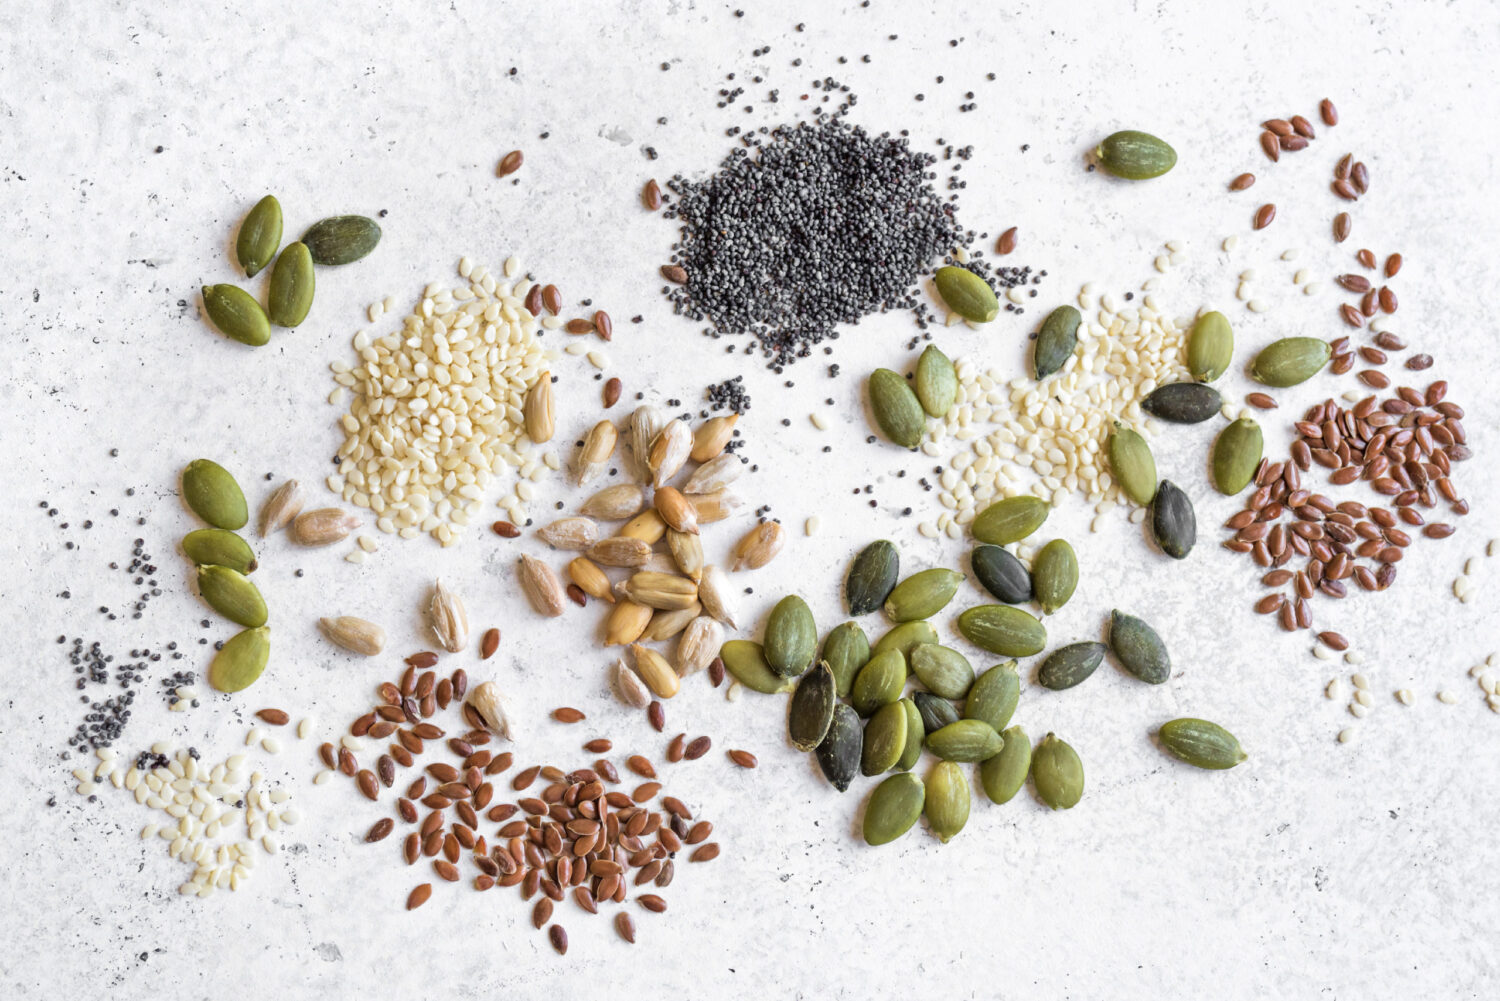 Various Seeds on white background. Assortment of seeds, healthy food ingredients, superfood, top view, copy space.